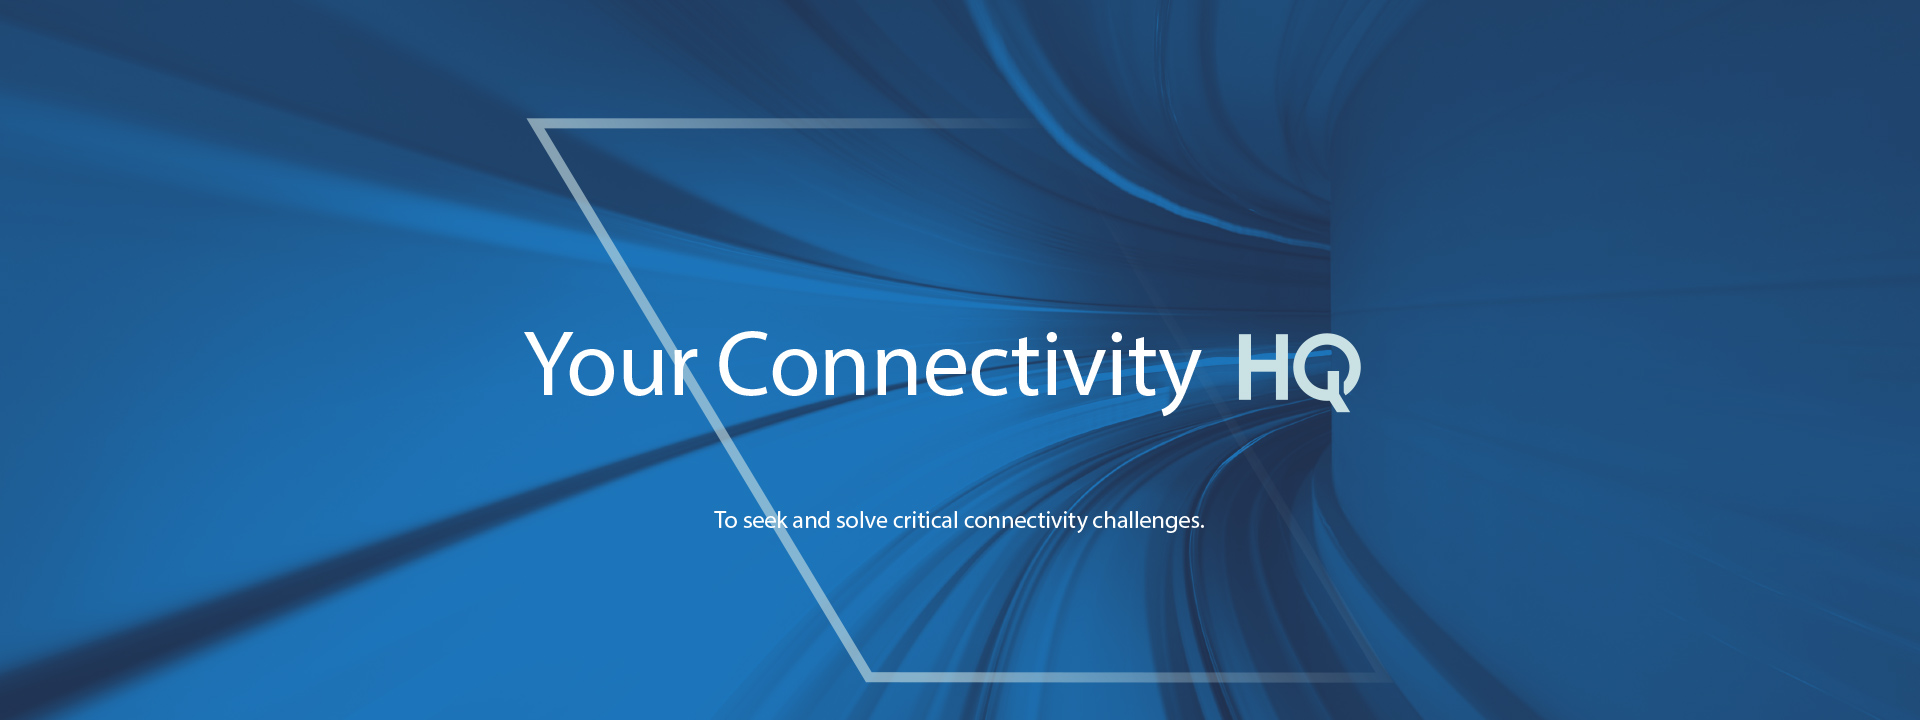 Your Connectivity HQ